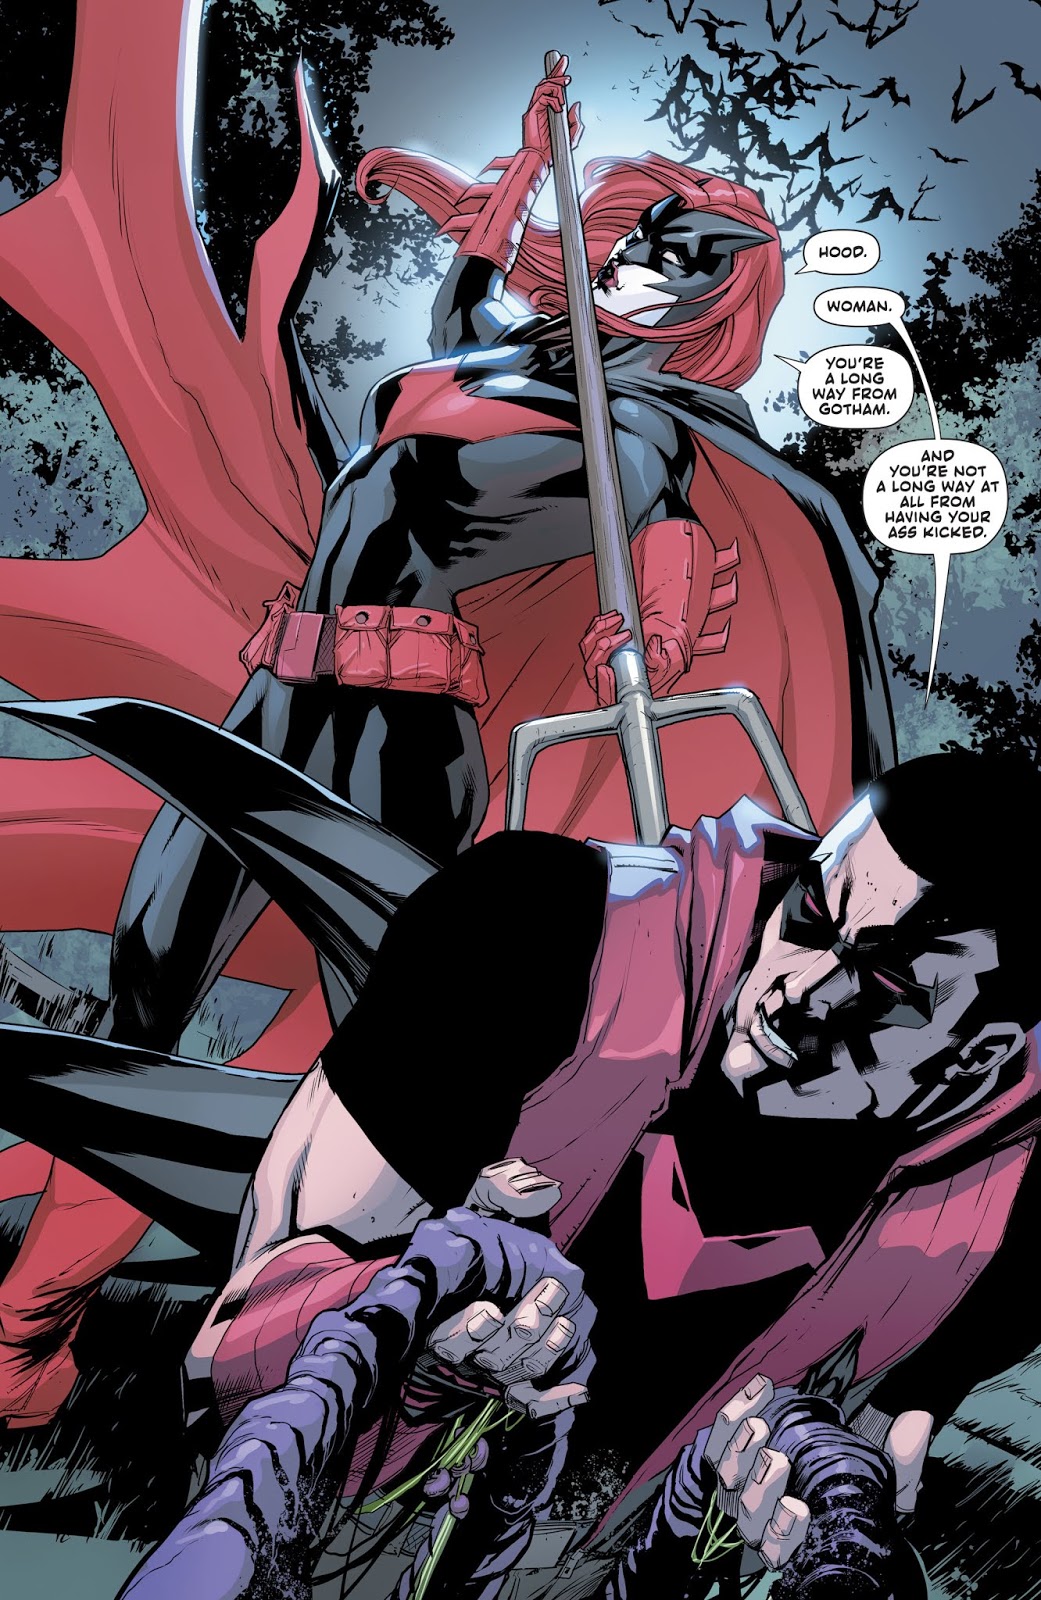 Batwoman (Red Hood and the Outlaws Vol. 2 #28)